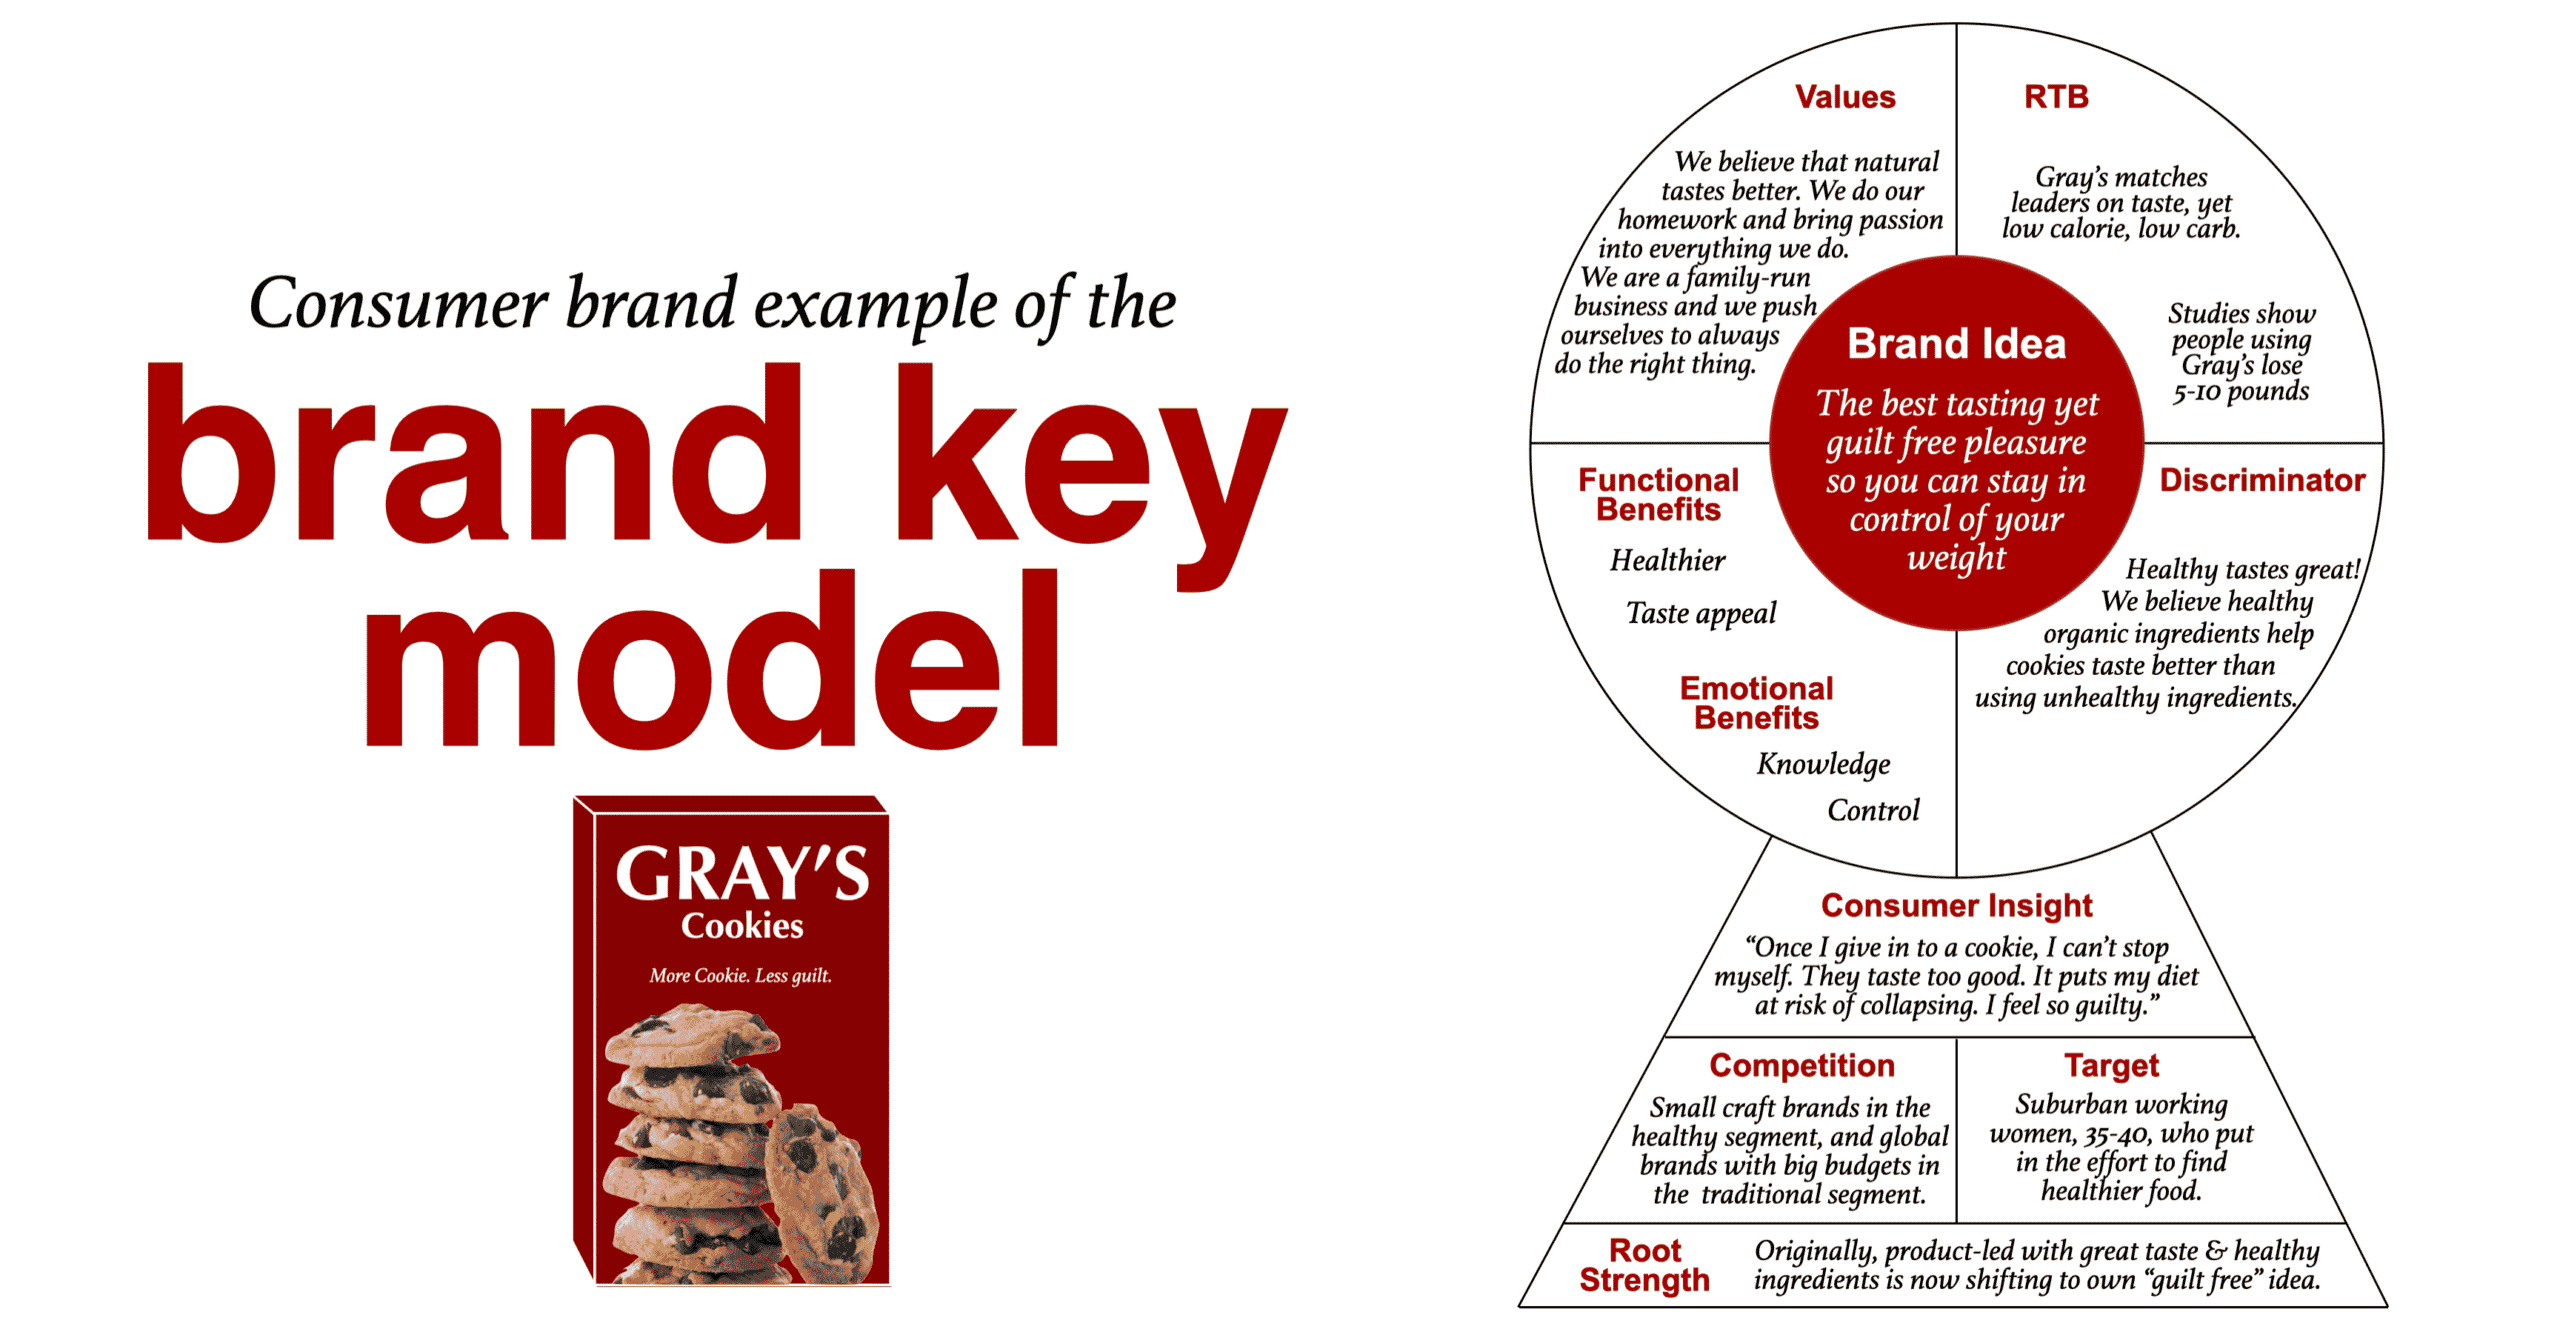 Brand Key Example for a Consumer Packaged Goods brand to bring the unique selling proposition to life